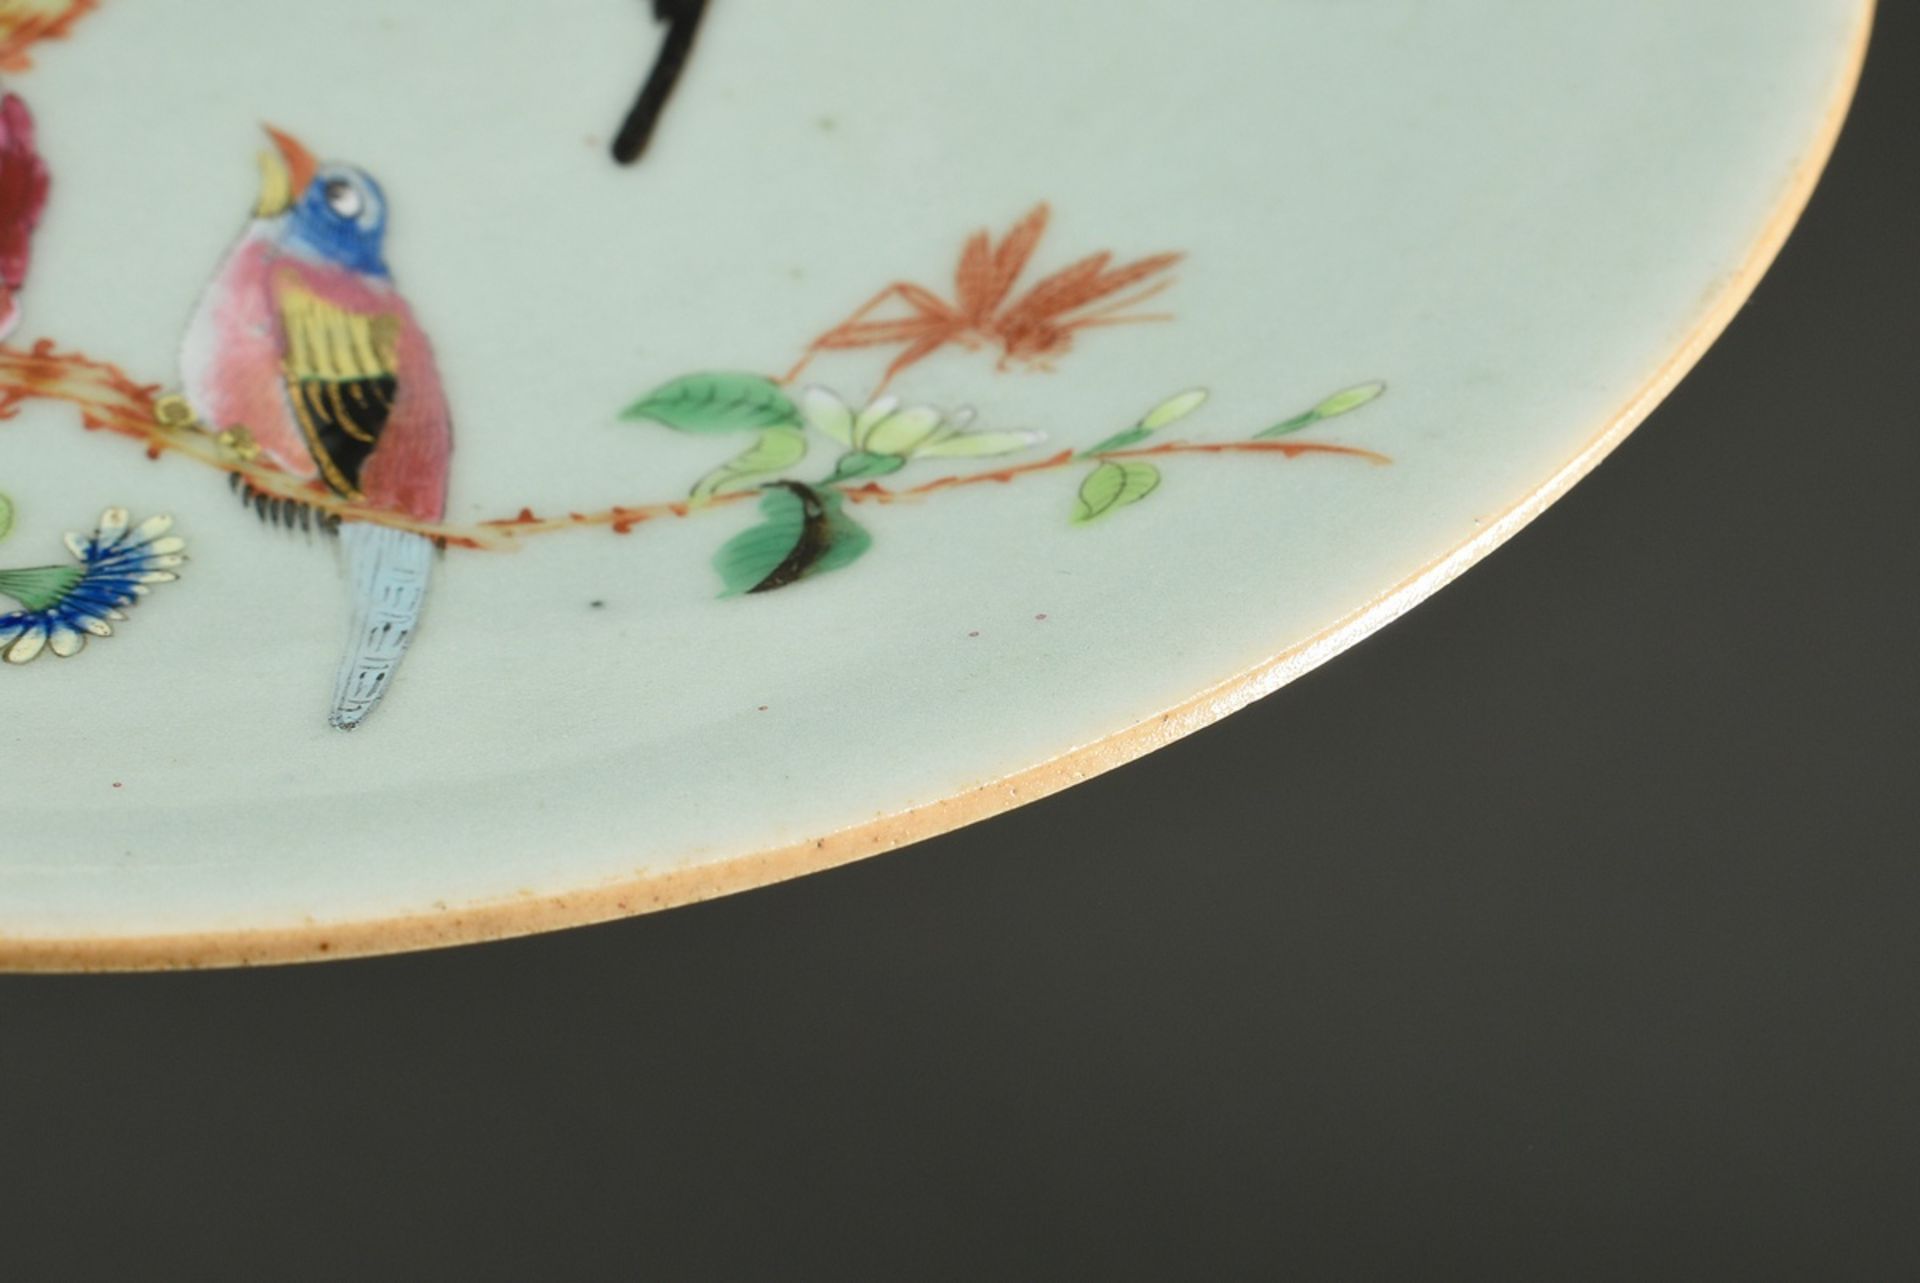 Pair of porcelain plates with polychrome enamel painting "Birds and Butterflies" on a delicate cela - Image 7 of 8